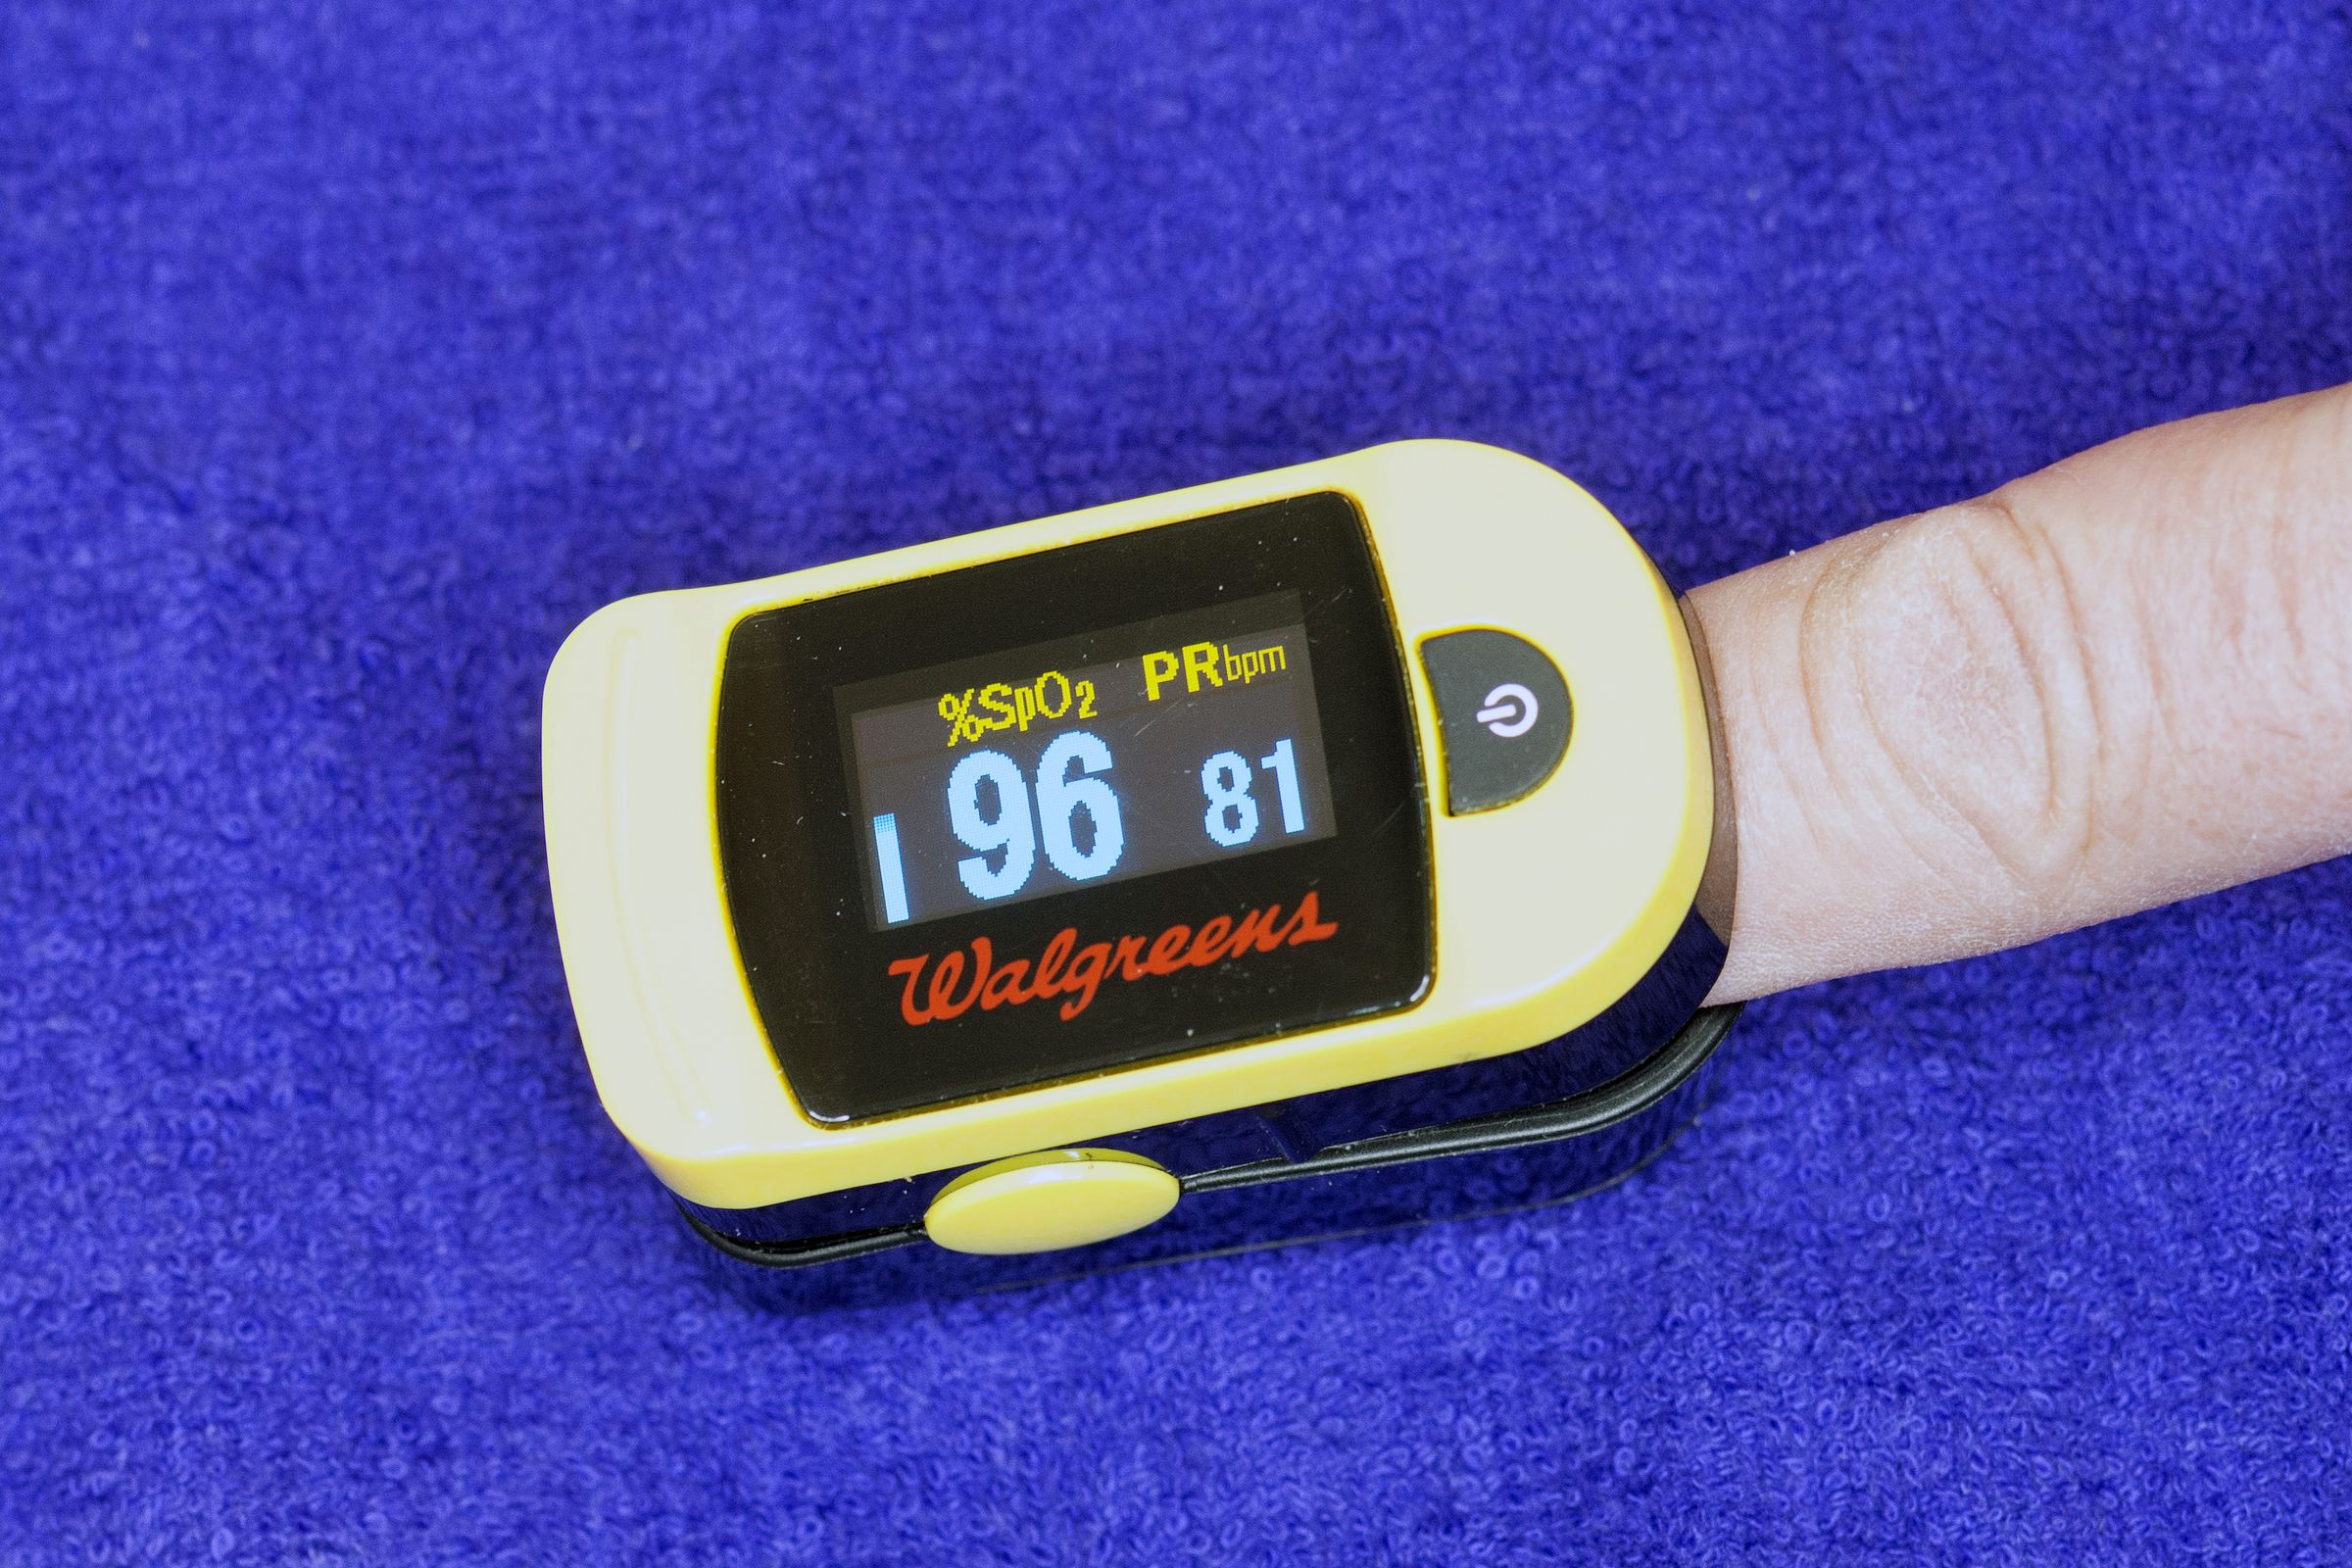 Pulse oximeter with the Walgreens logo clipped on a finger against a blue background.